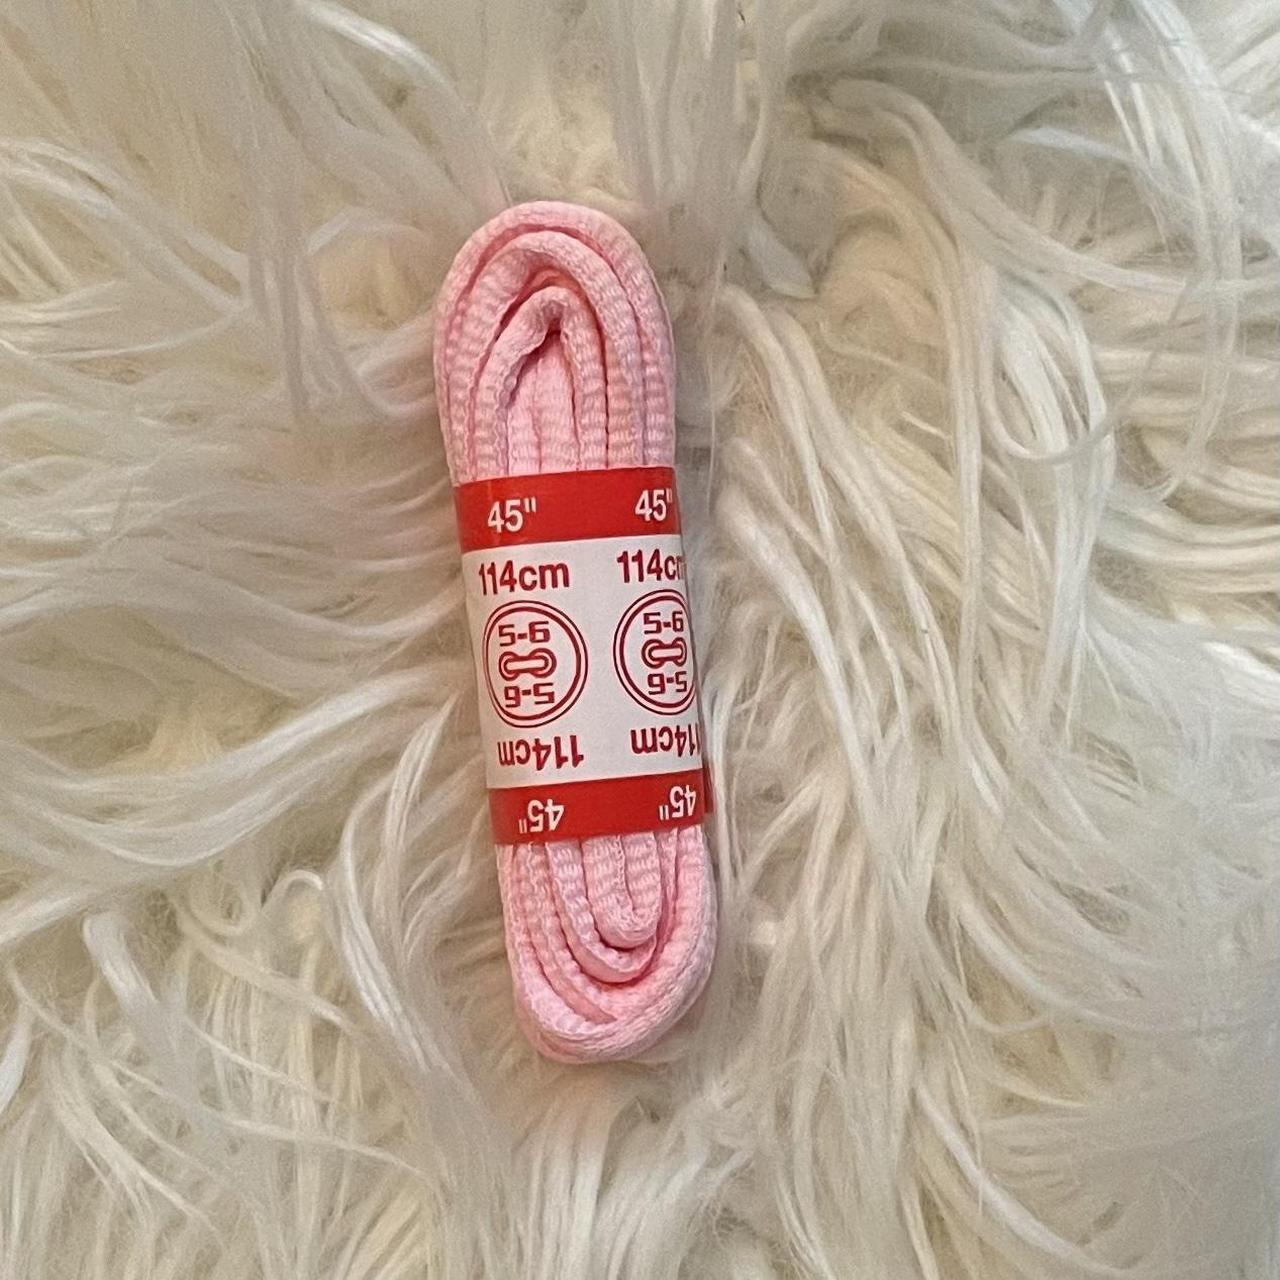 Pink Shoe Laces Brand new 45” - Depop